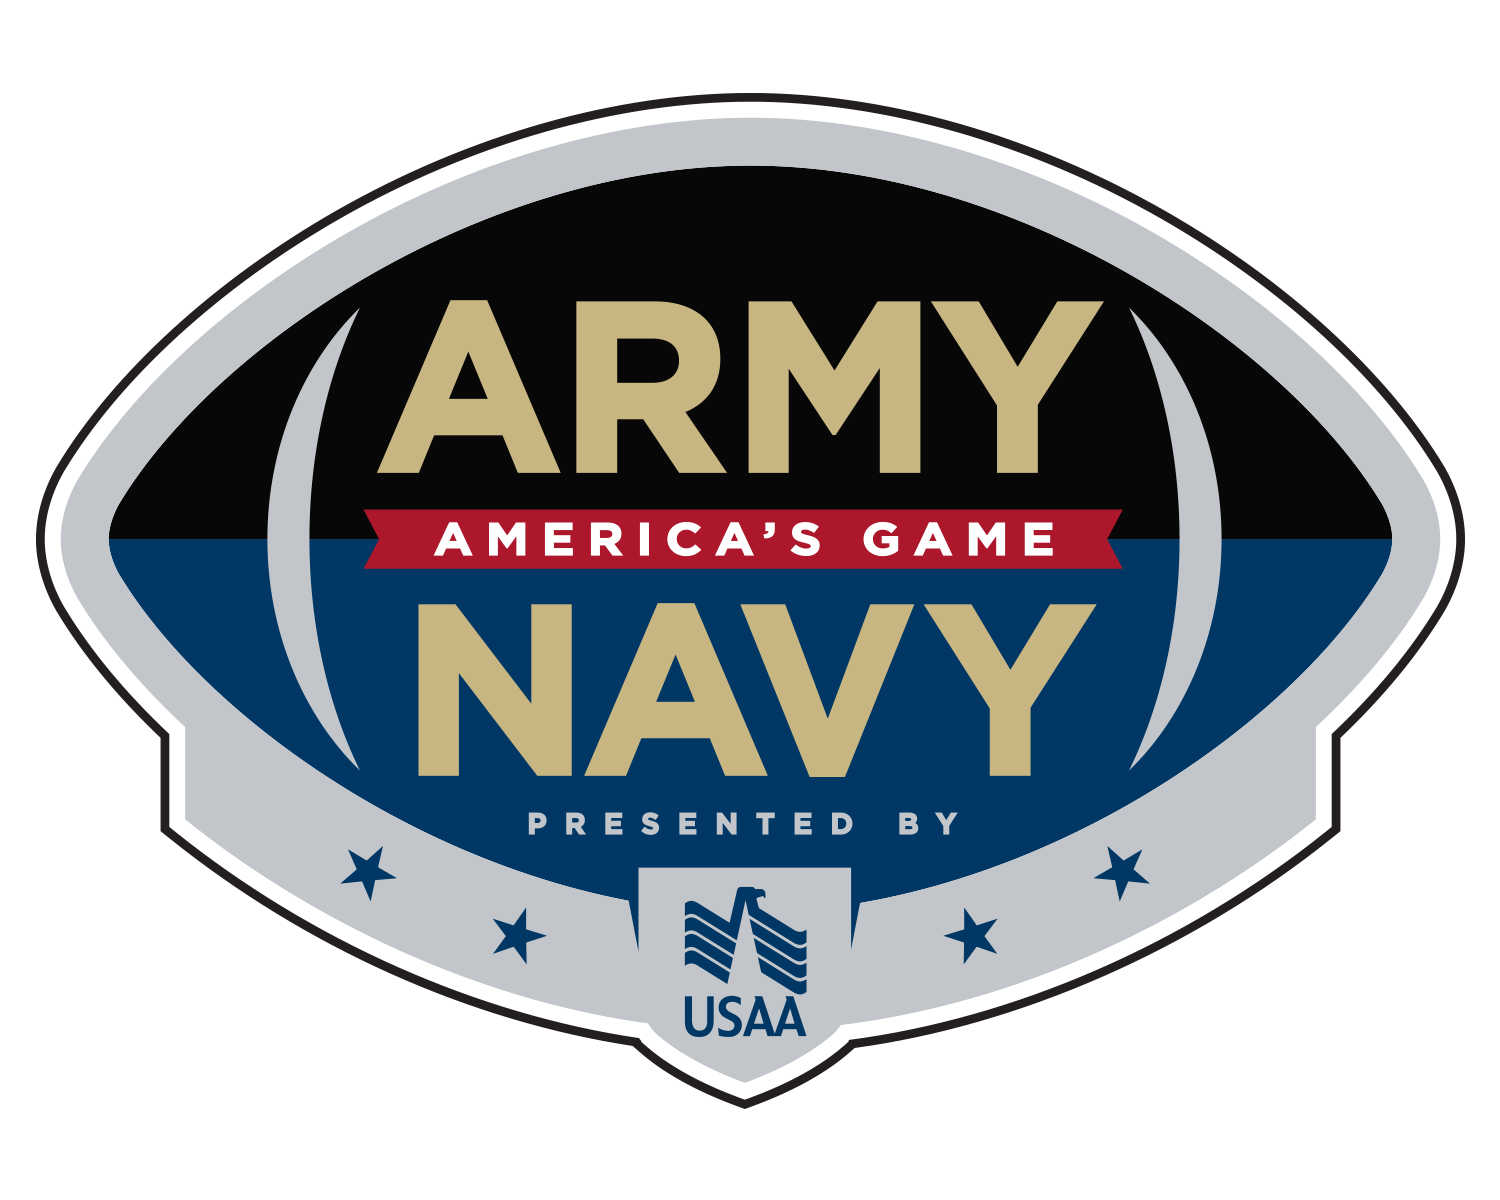 Usaa Army Navy Game Army Military